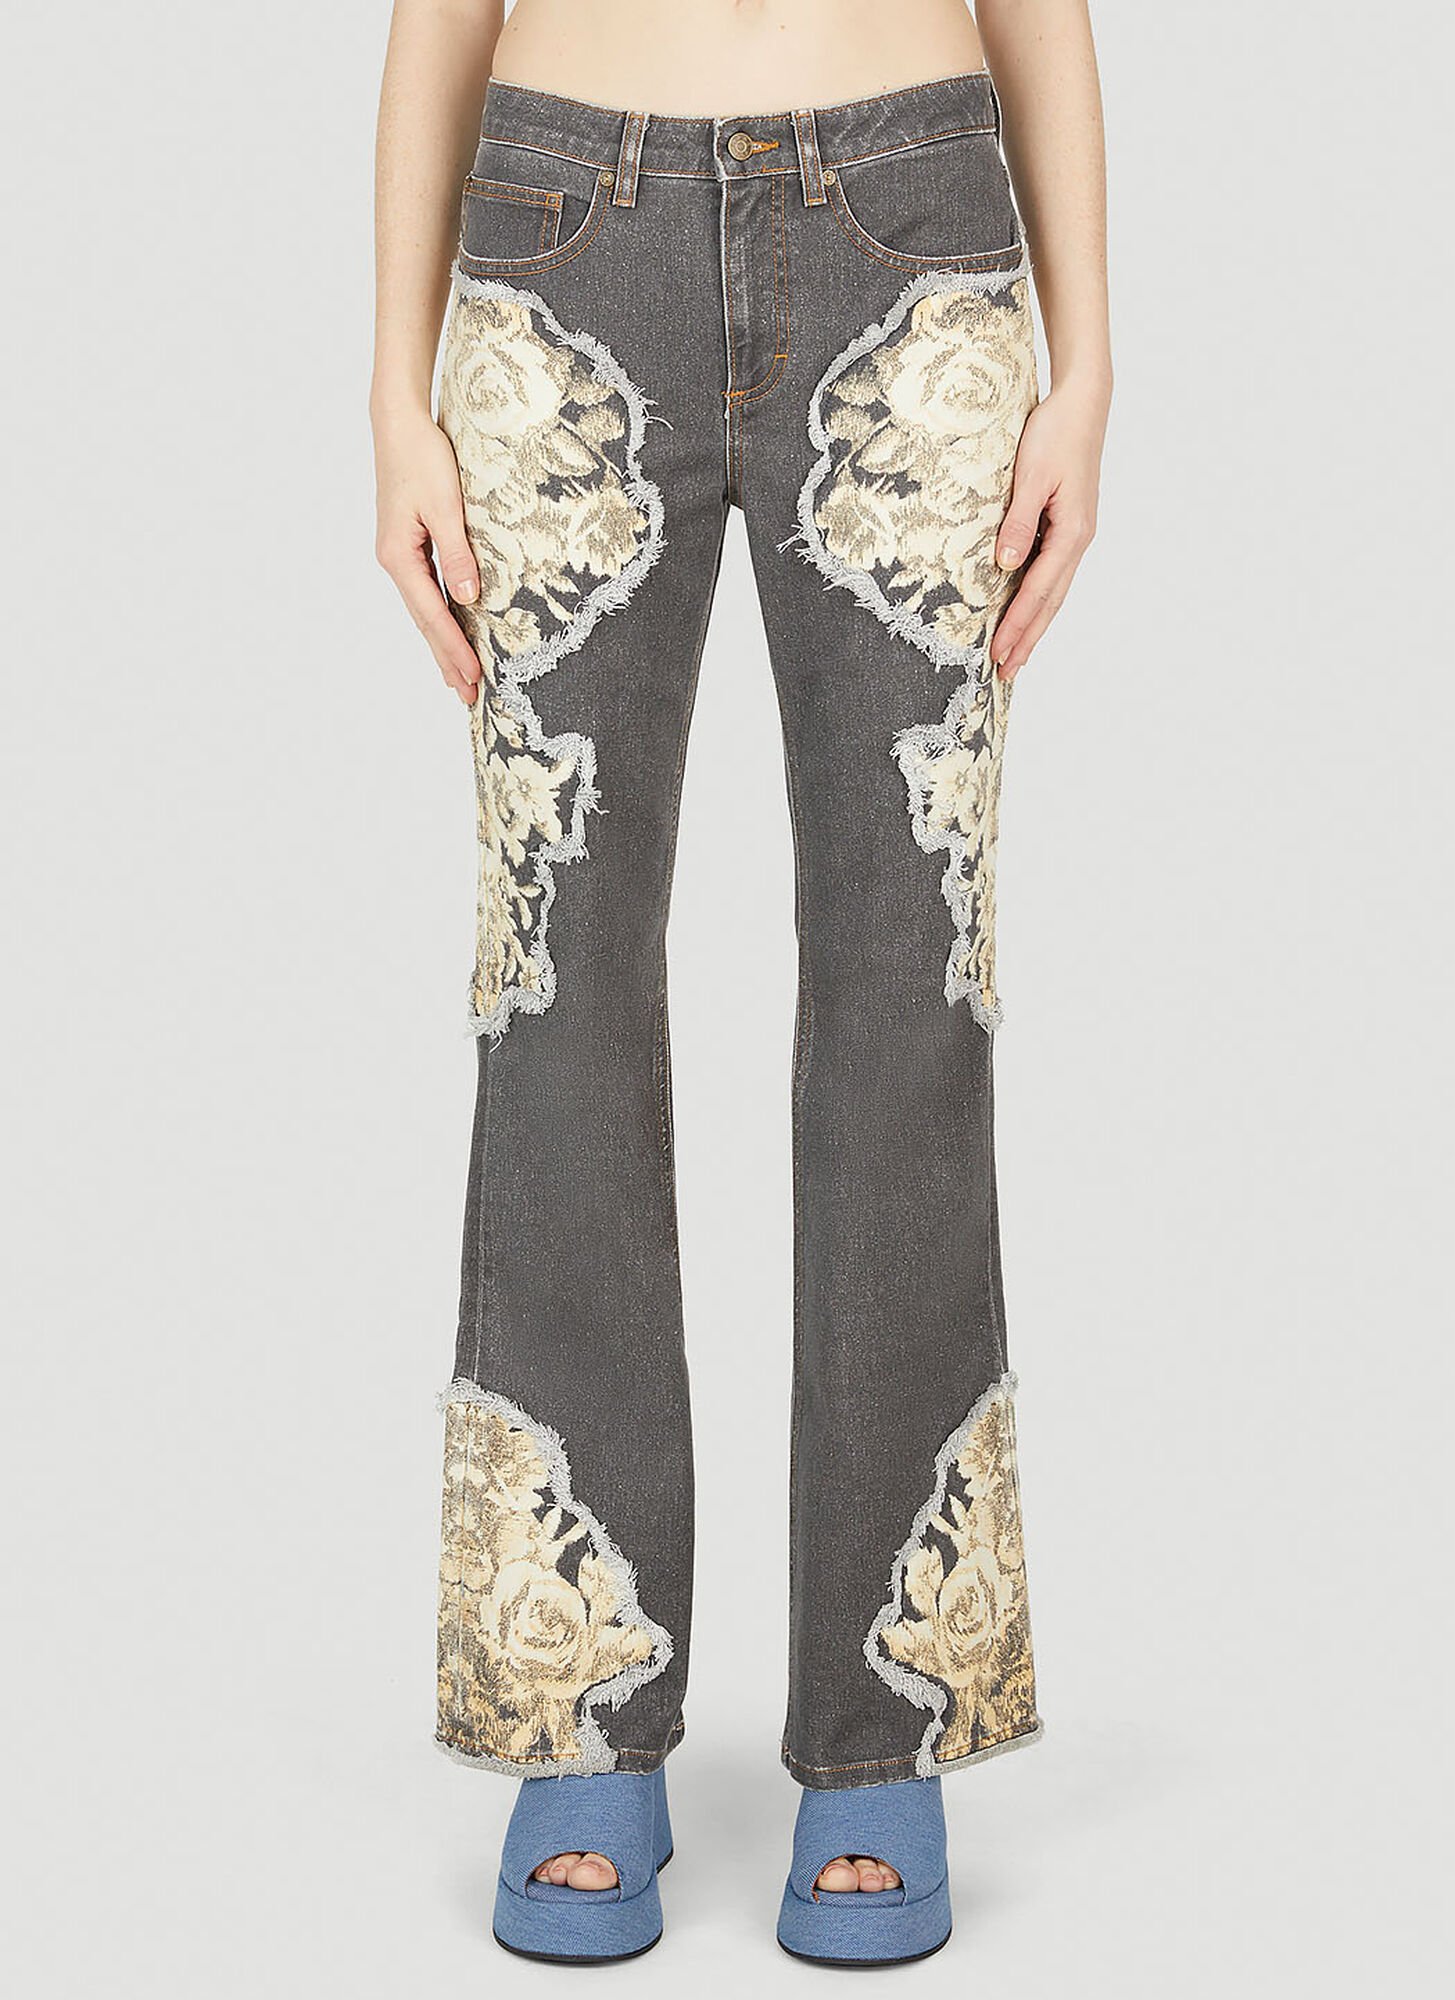 Guess Usa Floral Printed Flared Jeans Female Grey